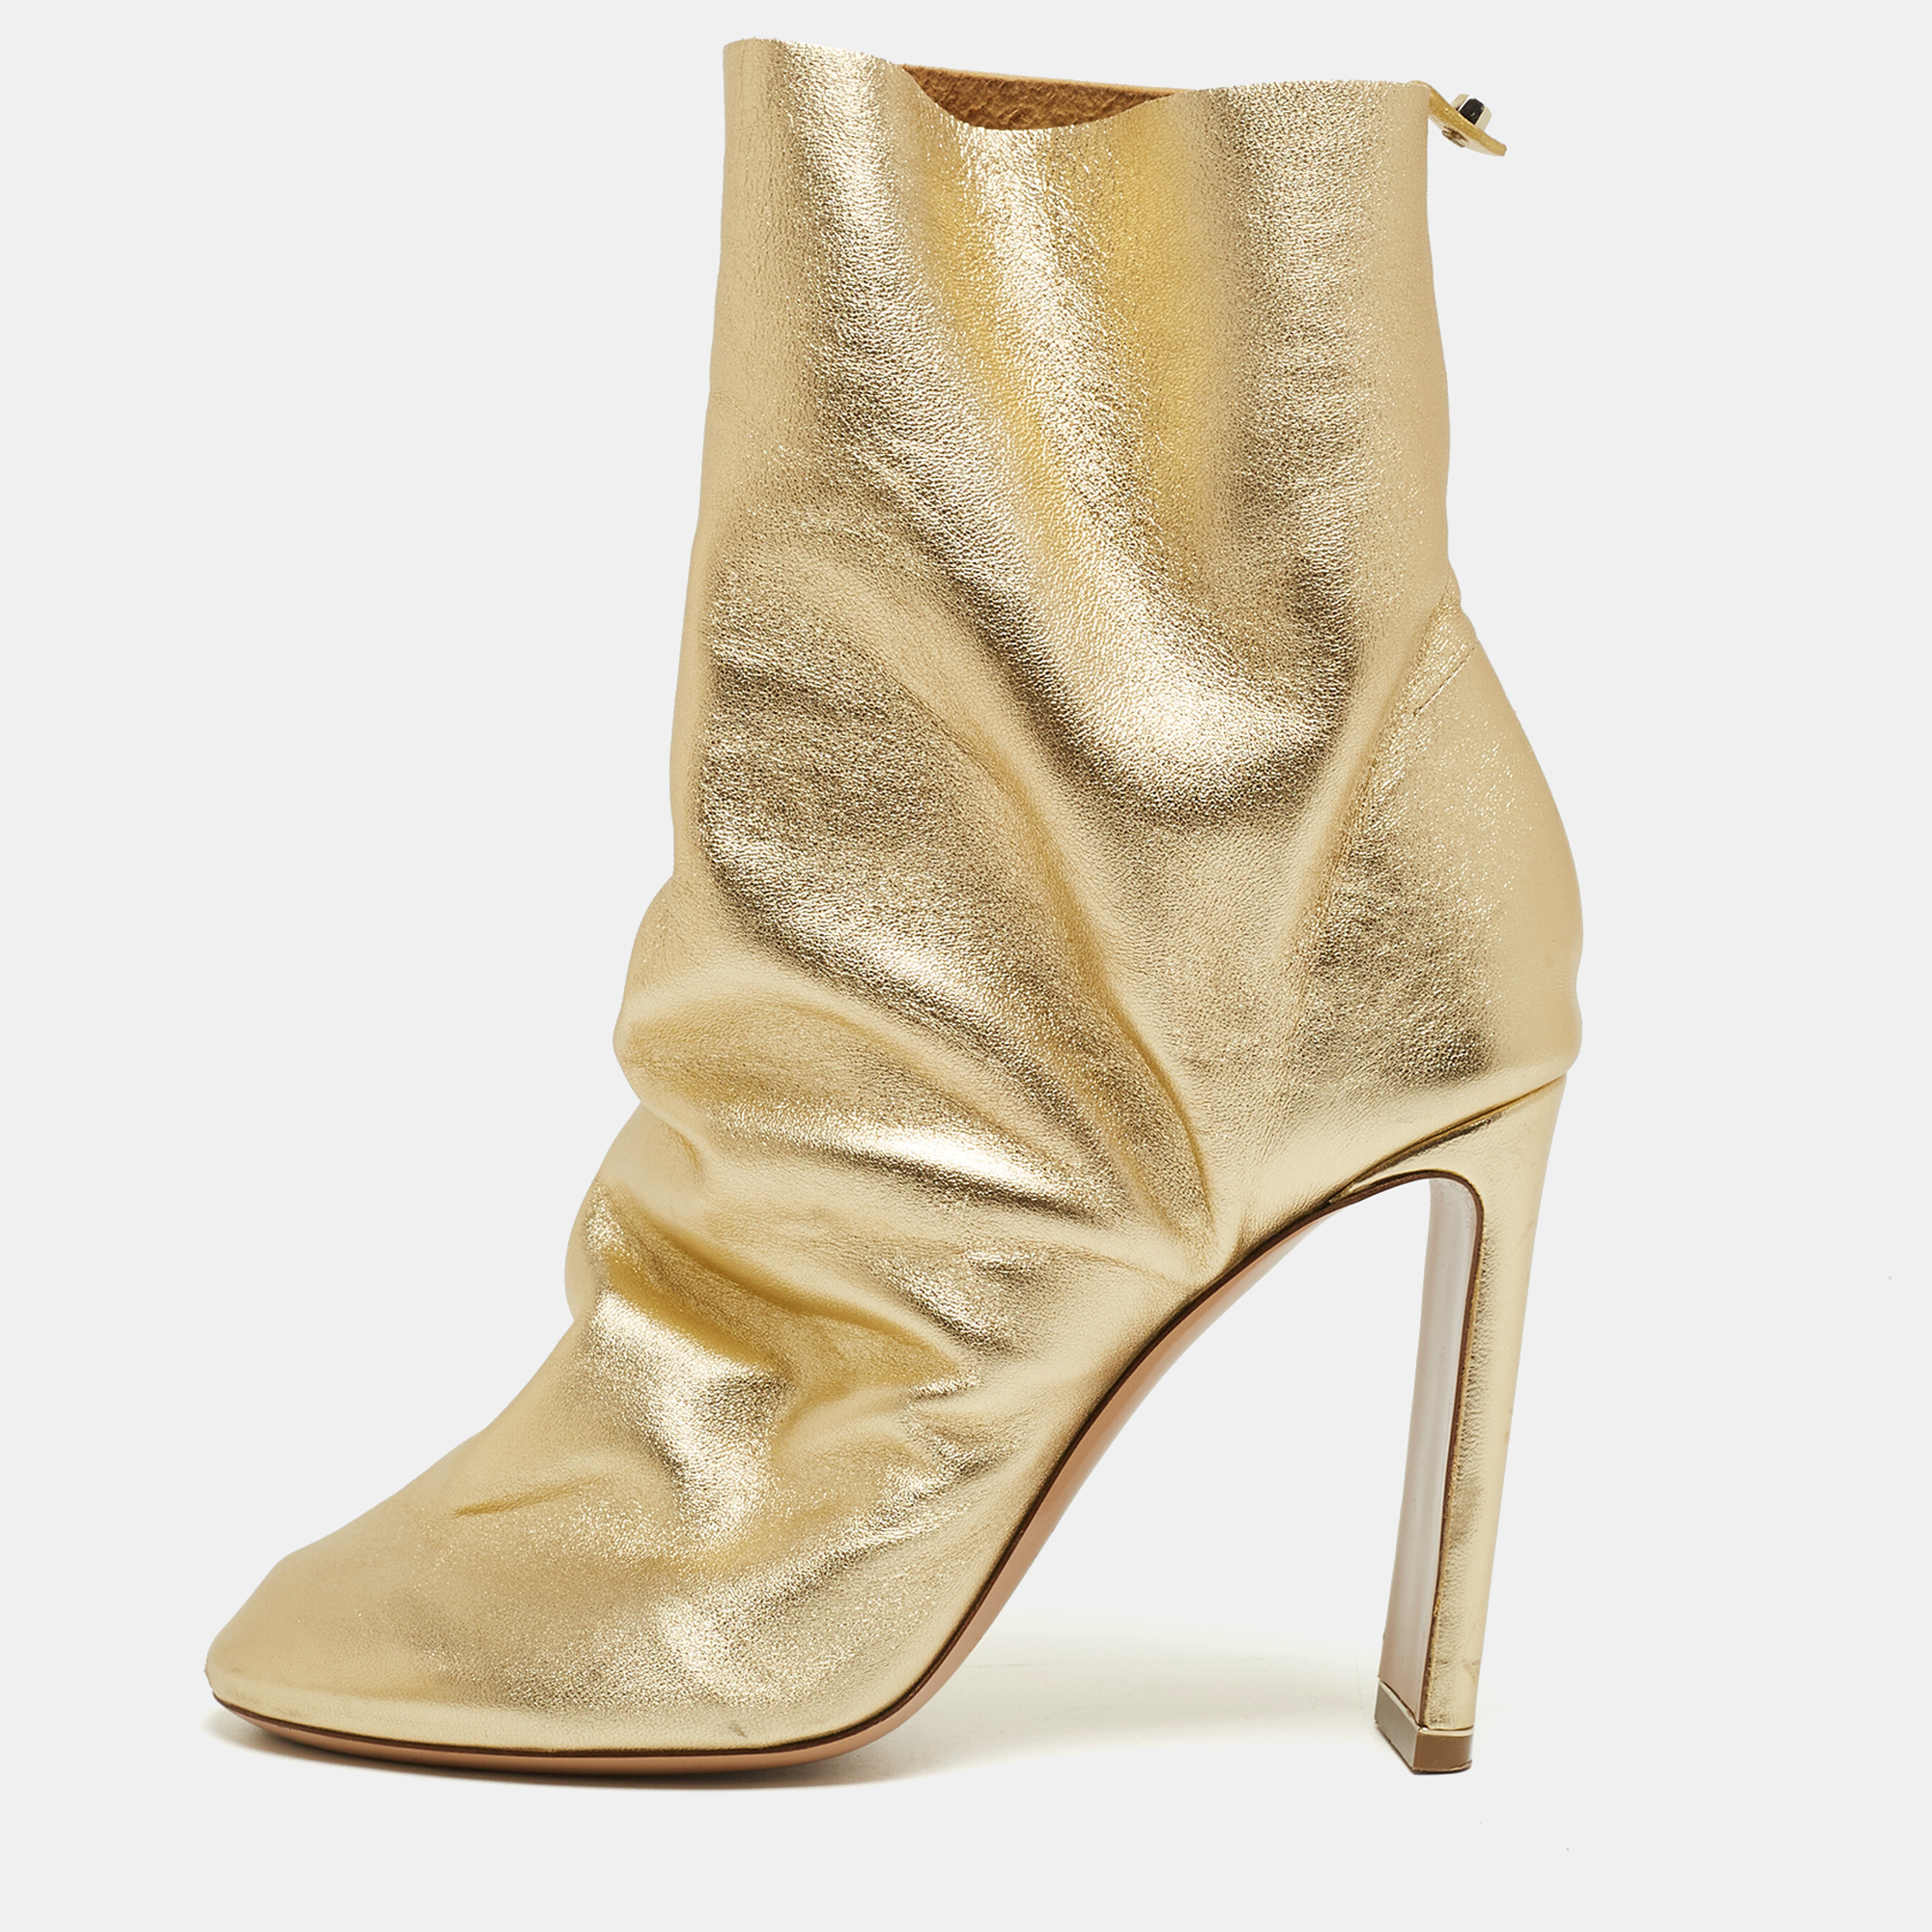 Nicholas kirkwood metallic gold foil leather d'arcy ruched ankle booties size 38.5